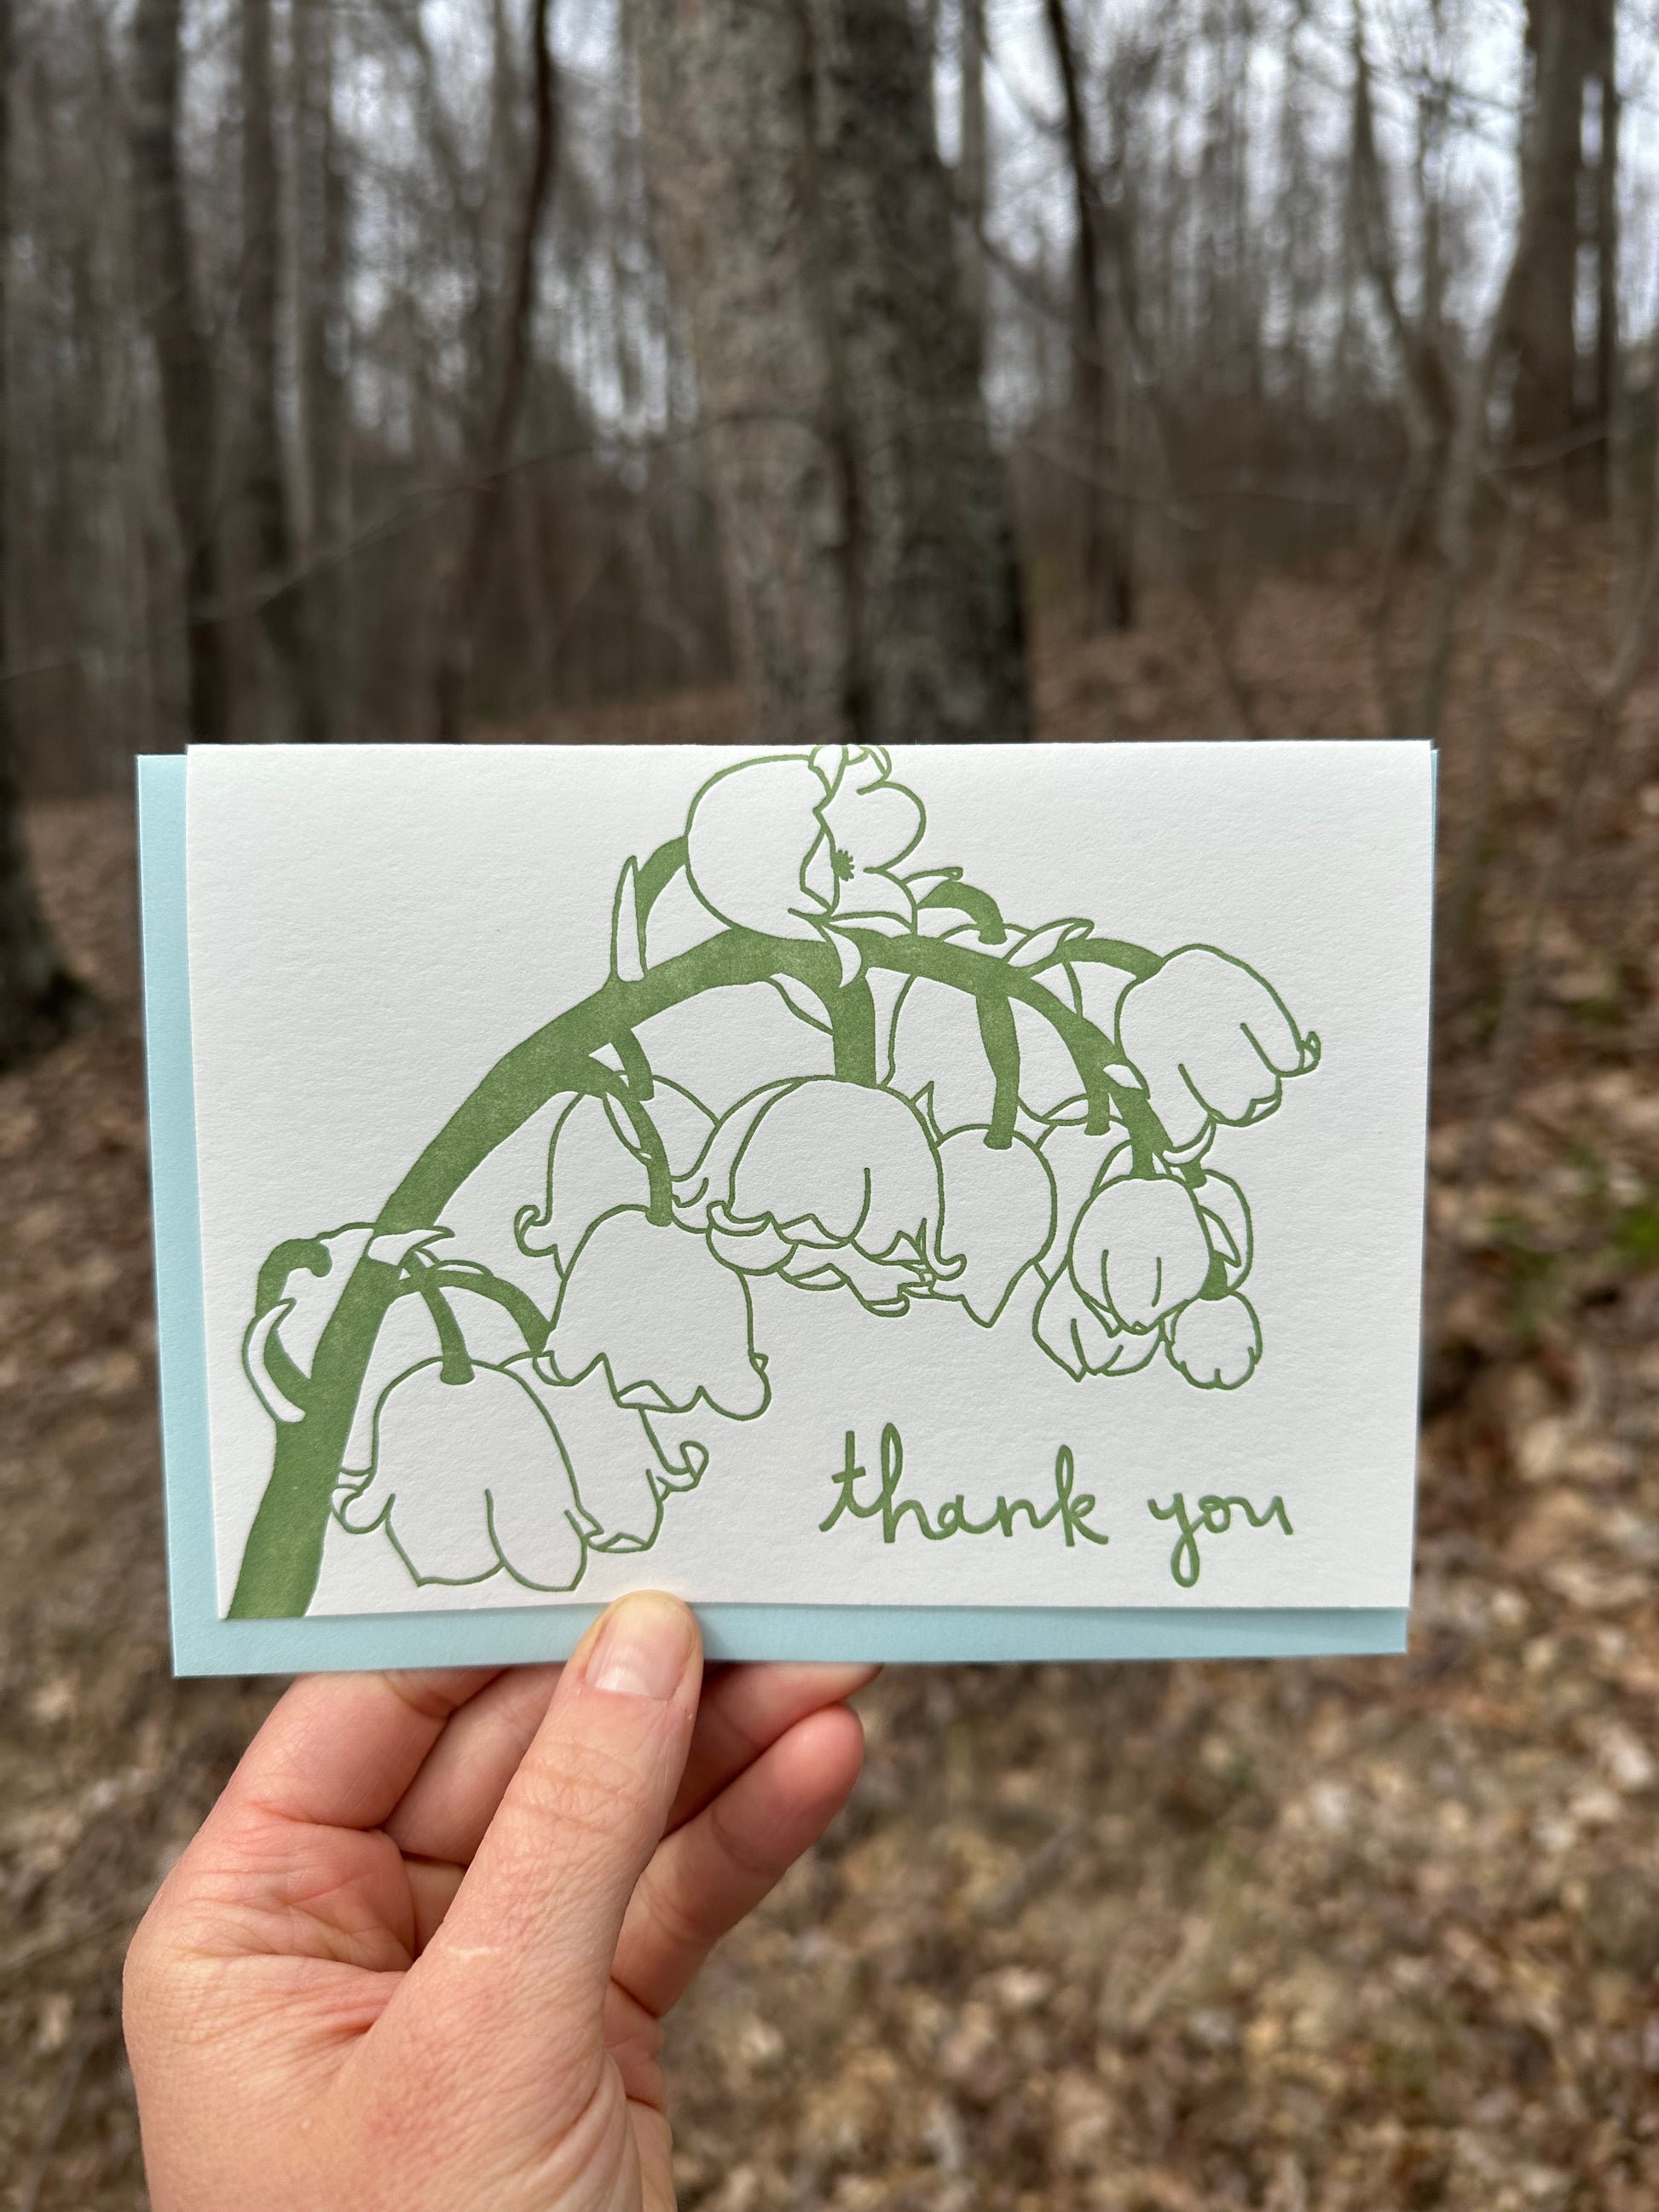 Letterpress greeting card featuring hand-drawn Lily of the Vlley, printed in a rich sage green ink. Whimsical hand-drawn text saying "Thank you" is shown at the bottom right side of the card, in the same green ink. The card is white, blank inside, and is paired with a light sky blue envelope. Card is shown outside in front of a deciduous forest in the winter. 